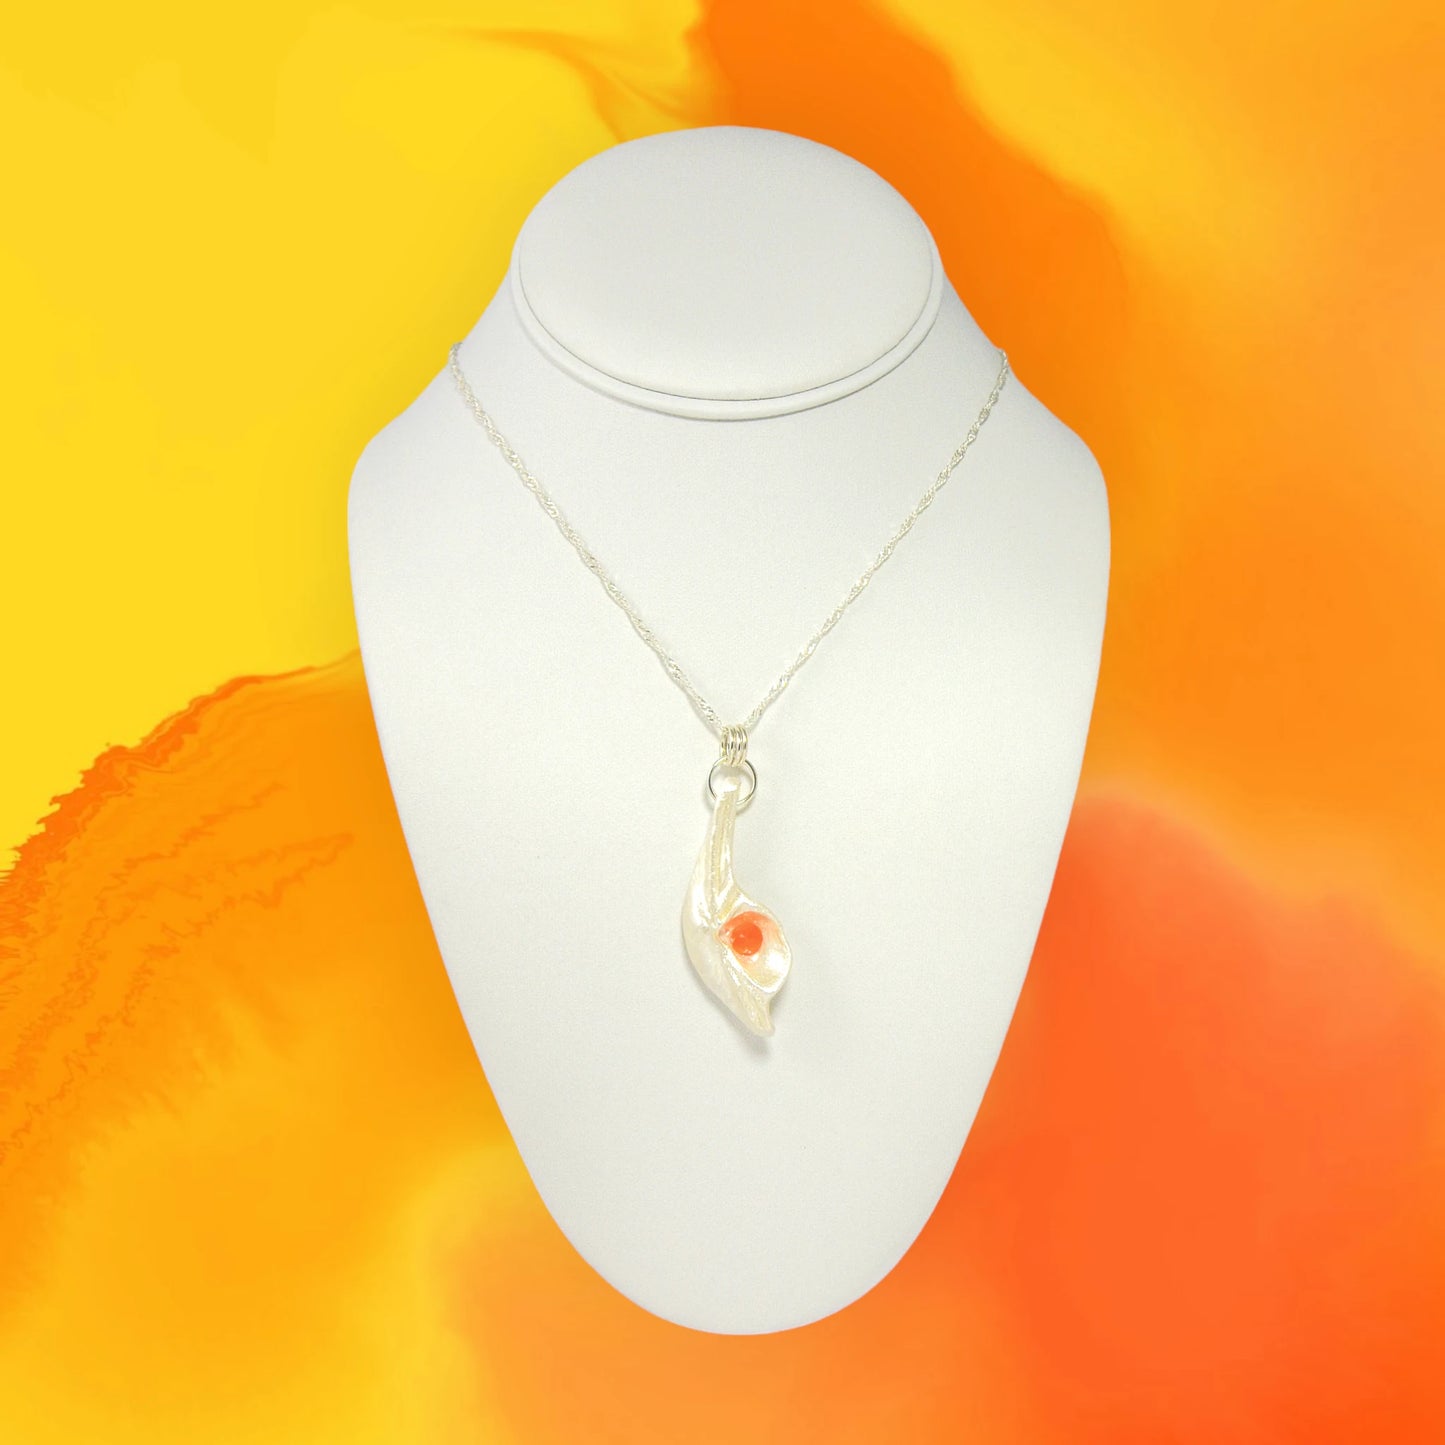 Natural Seashell pendant, elevating the beautiful natural nuances to new heights. The pendant is perfectly adorned with a mesmerizing rose cut Carnelian gemstone. The pendant is hanging on a necklace over a white displayer.  the background is orange and yellow.